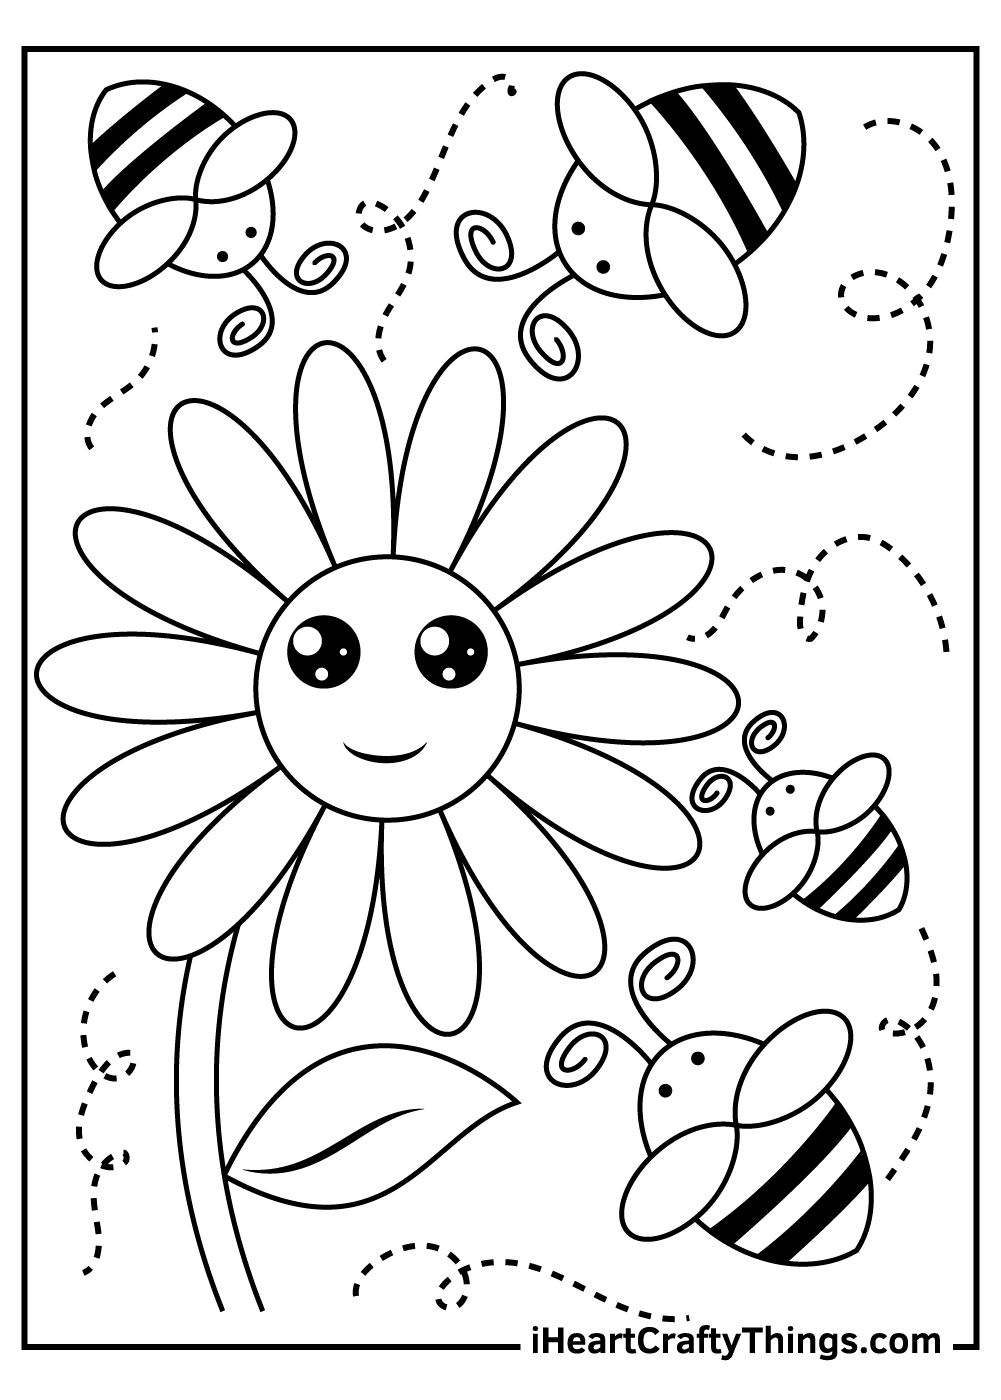 Coloring Pages Of Bees Home Design Ideas